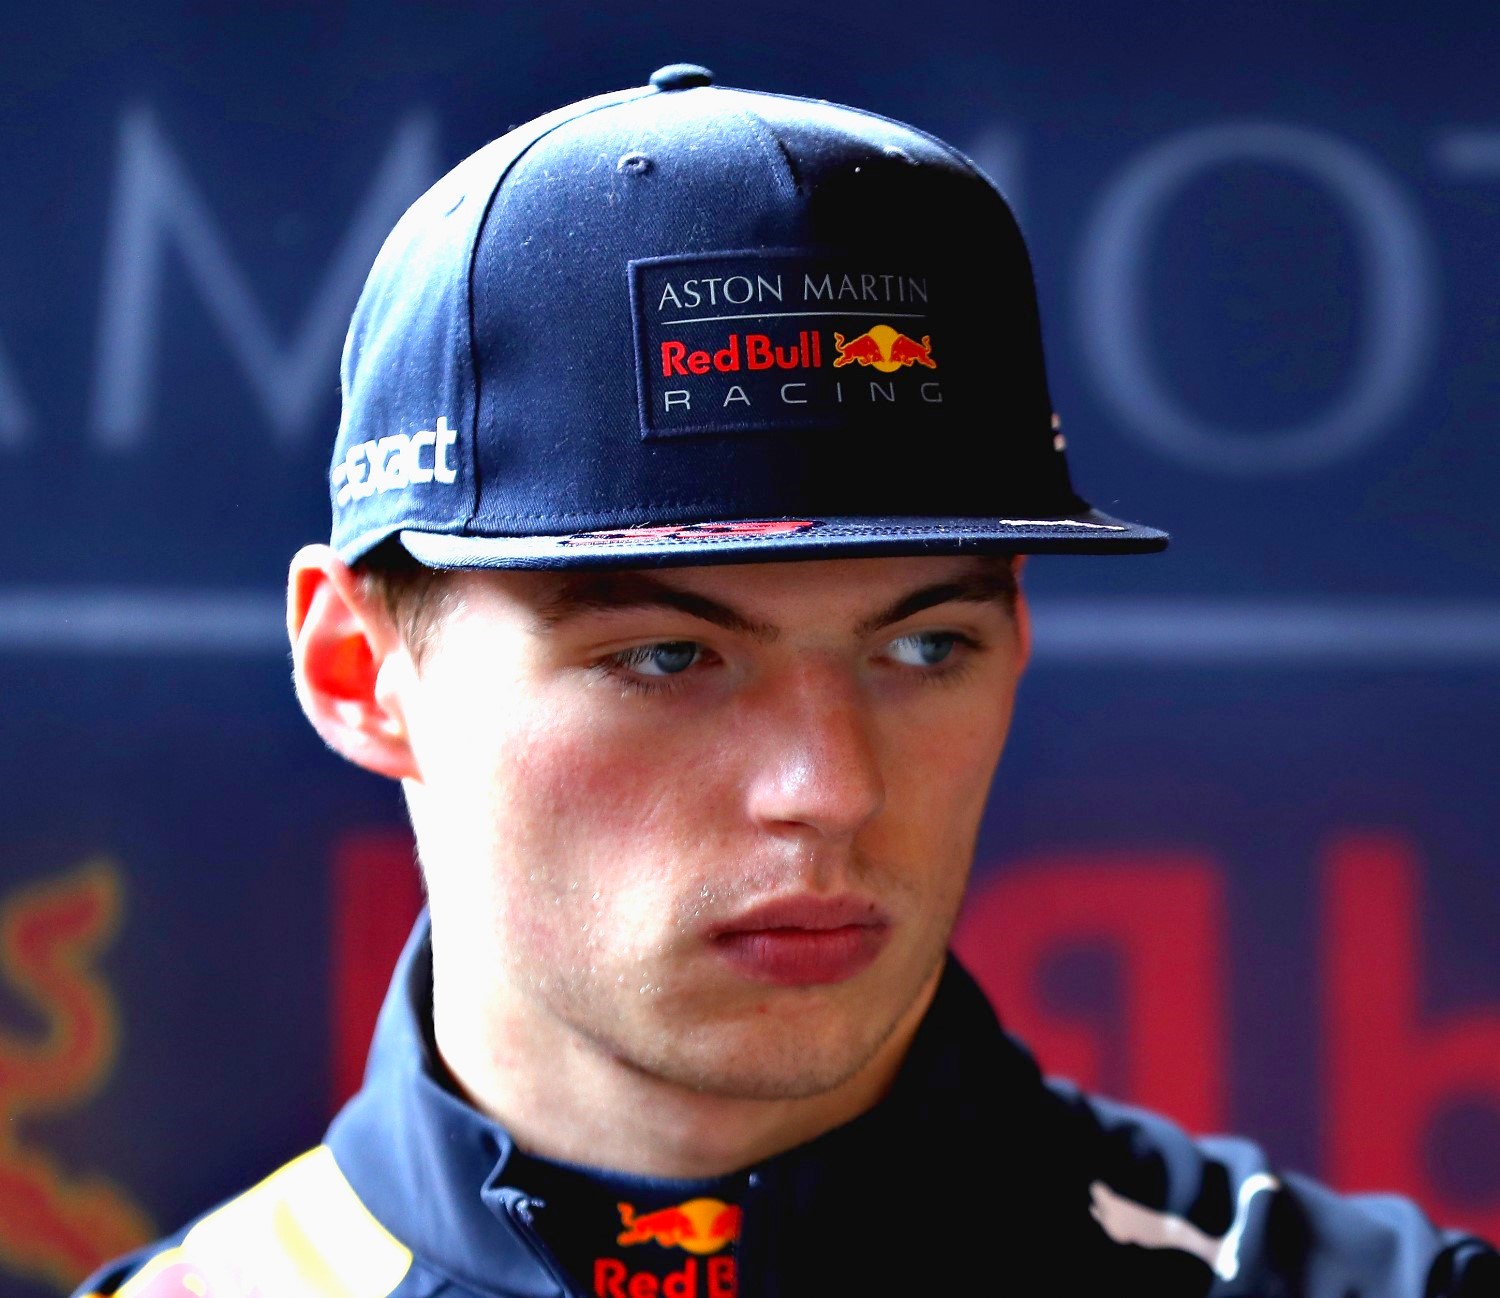 Max Verstappen won't win anything is the rumor of Adrian newey following Ricciardo to Renault turns out to be true